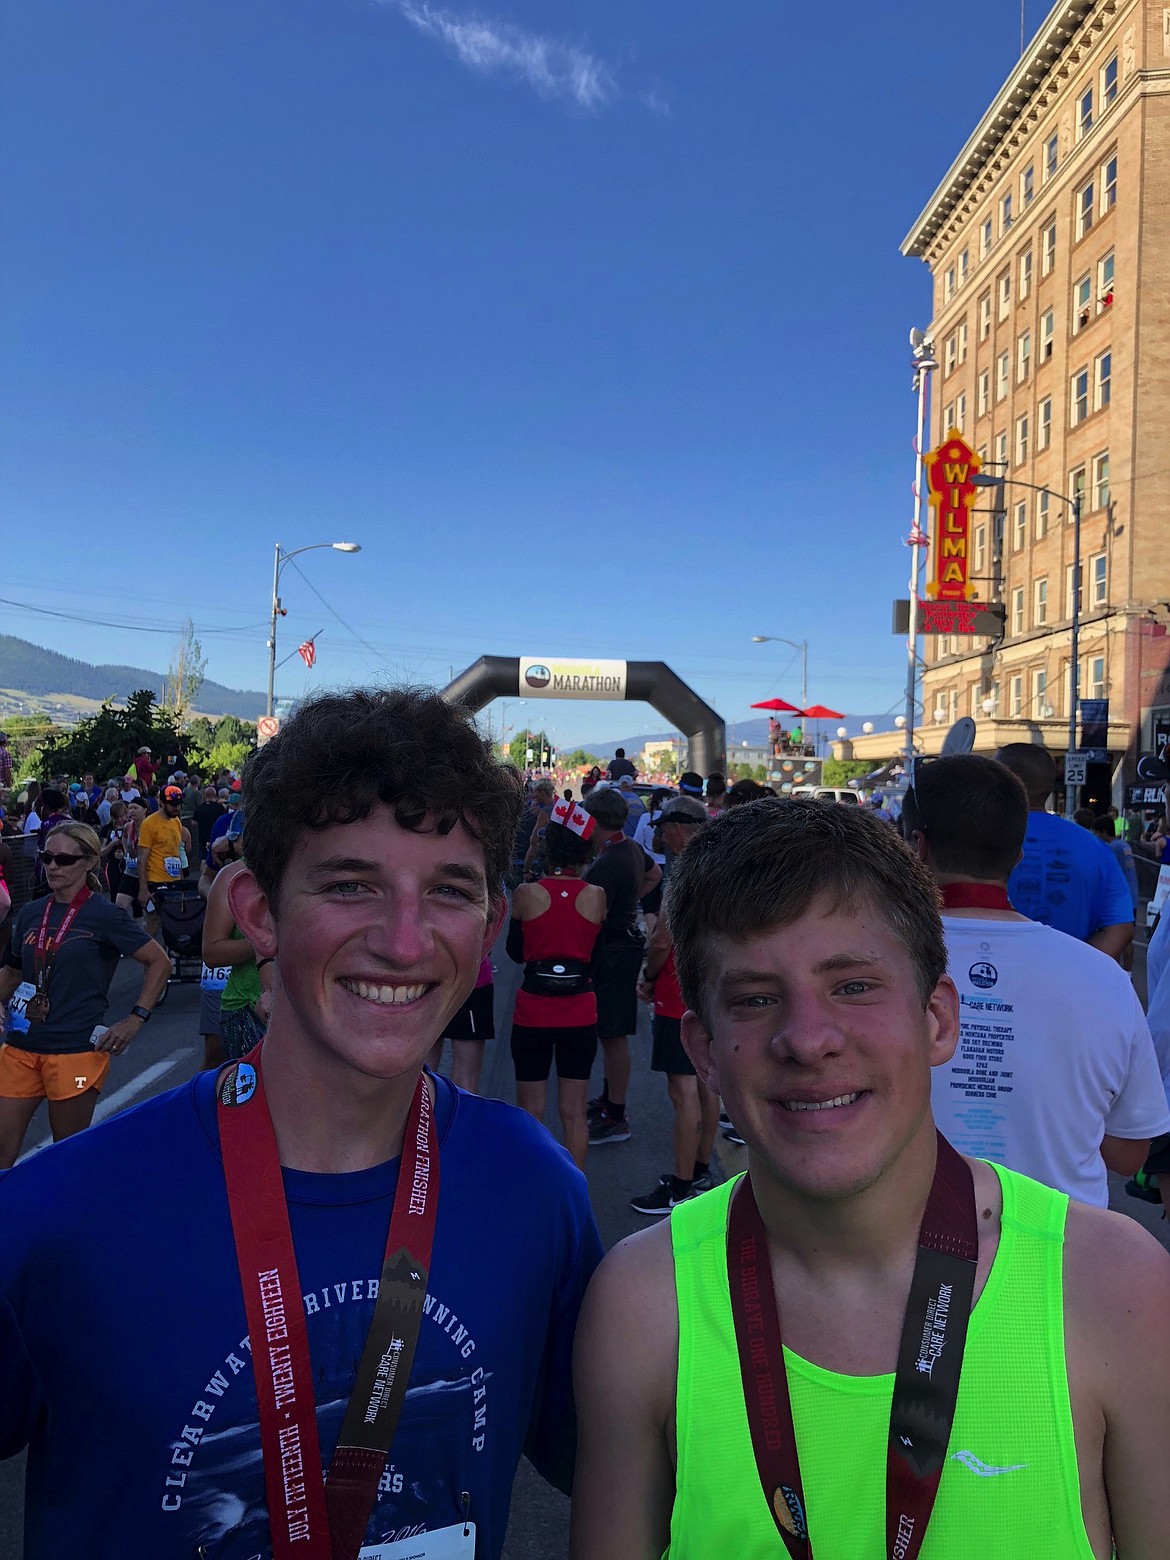 Jim Kinnard, right, an incoming senior at Lake City High School and Idaho Special Olympics athlete, completed the Missoula Half Marathon on Sunday with a personal record of 2 hours, 12 minutes &#151; shaving 11 minutes from his time in last year&#146;s race there. Coach and friend, Jared Meredith, left, a 2018 Coeur d&#146;Alene High graduate, has been training with Jim since last year for this race.

Courtesy photo